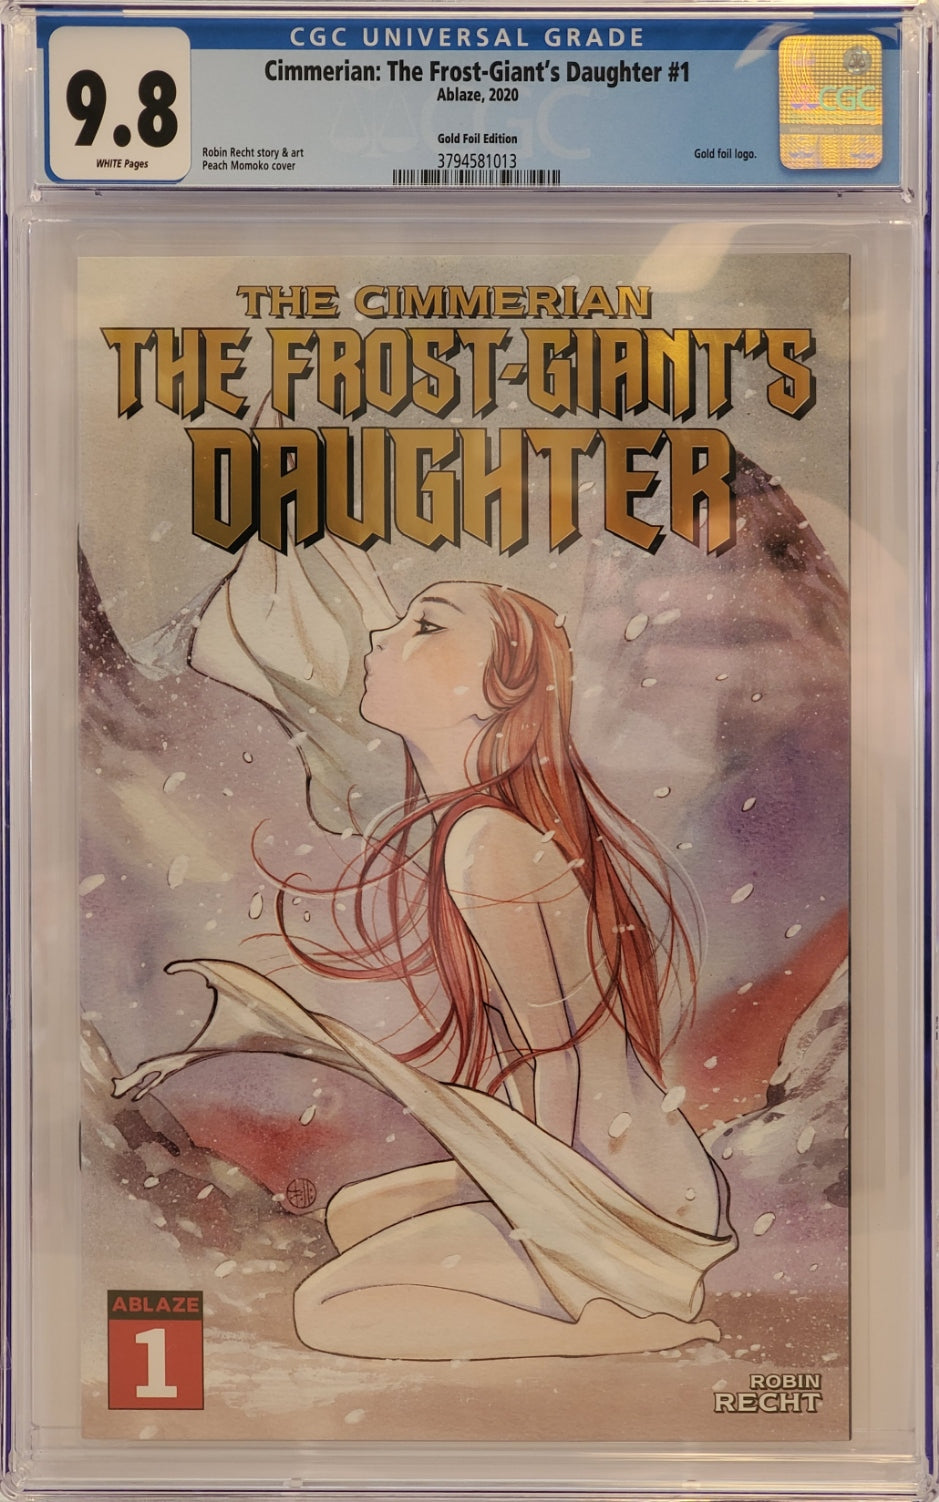 CGC 9.8 CIMMERIAN: THE FROST-GIANT'S DAUGHTER #1 Peach Momoko GOLD FOIL EXCLUSIVE